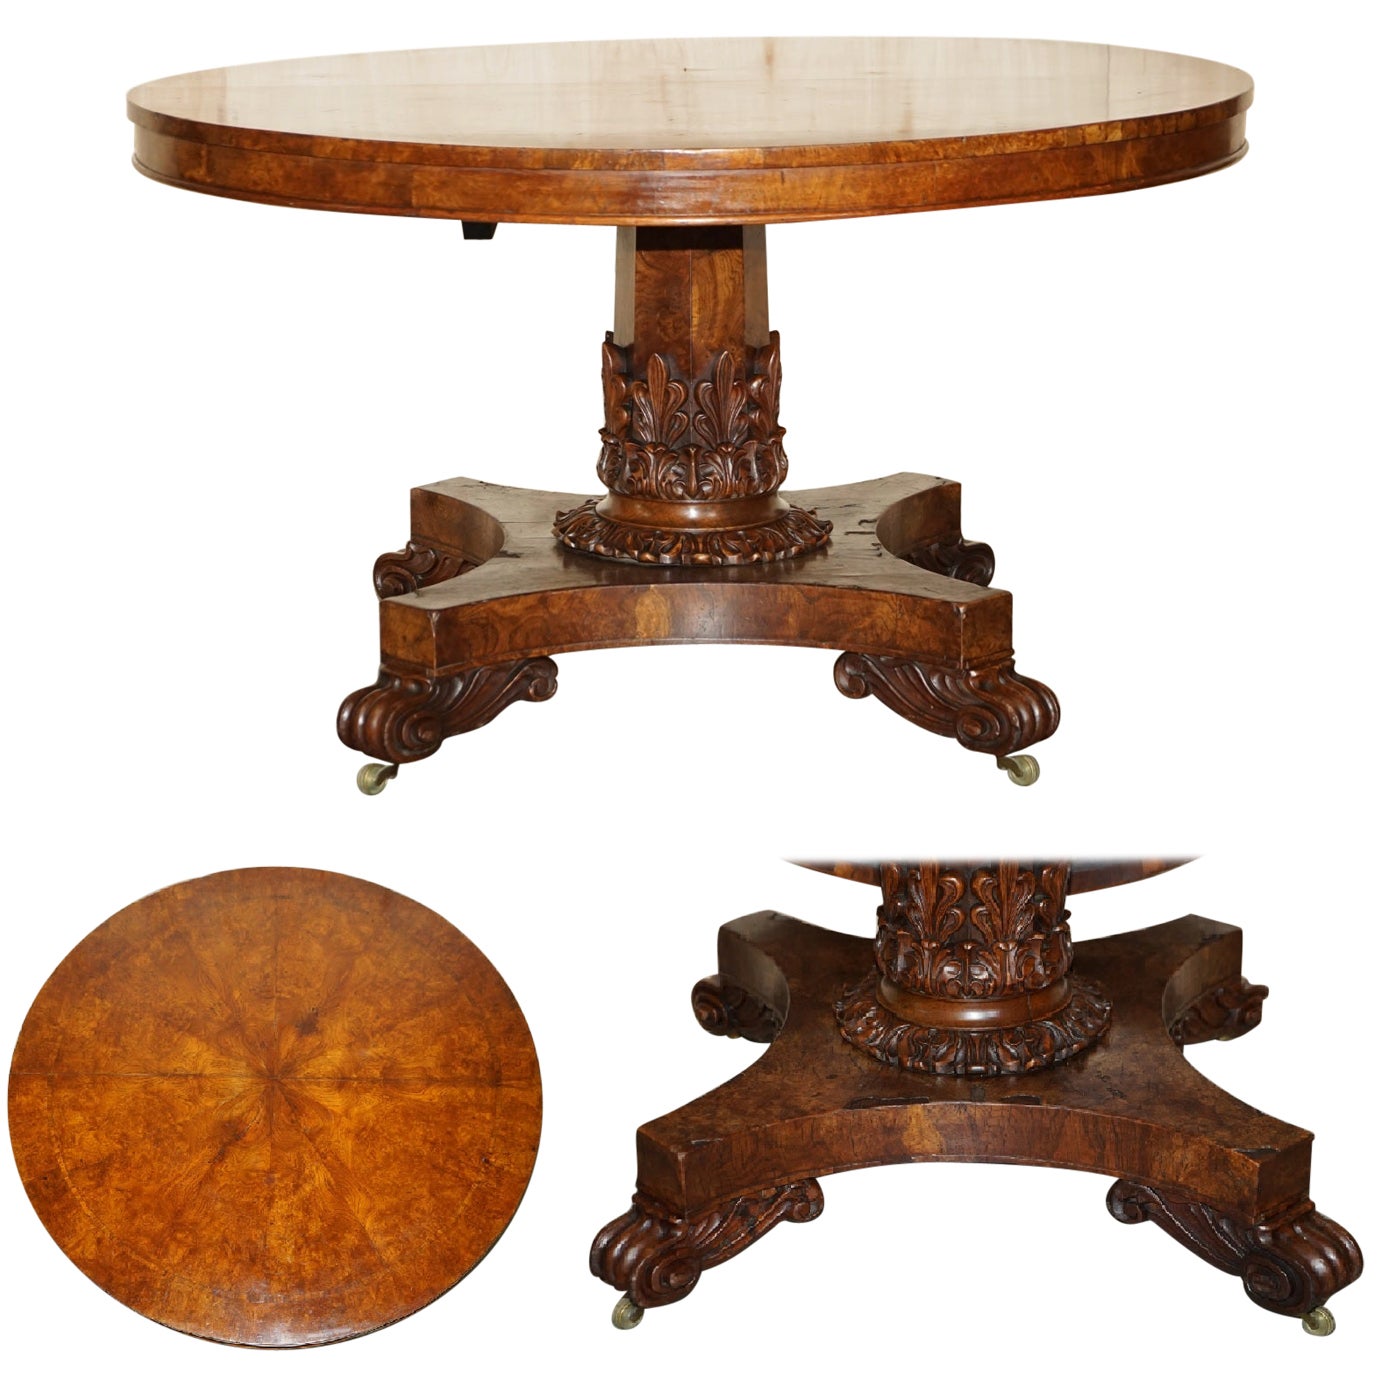 Sublime circa 1840 Victorian Pollard Oak Hand Carved Centre Occasional Table For Sale